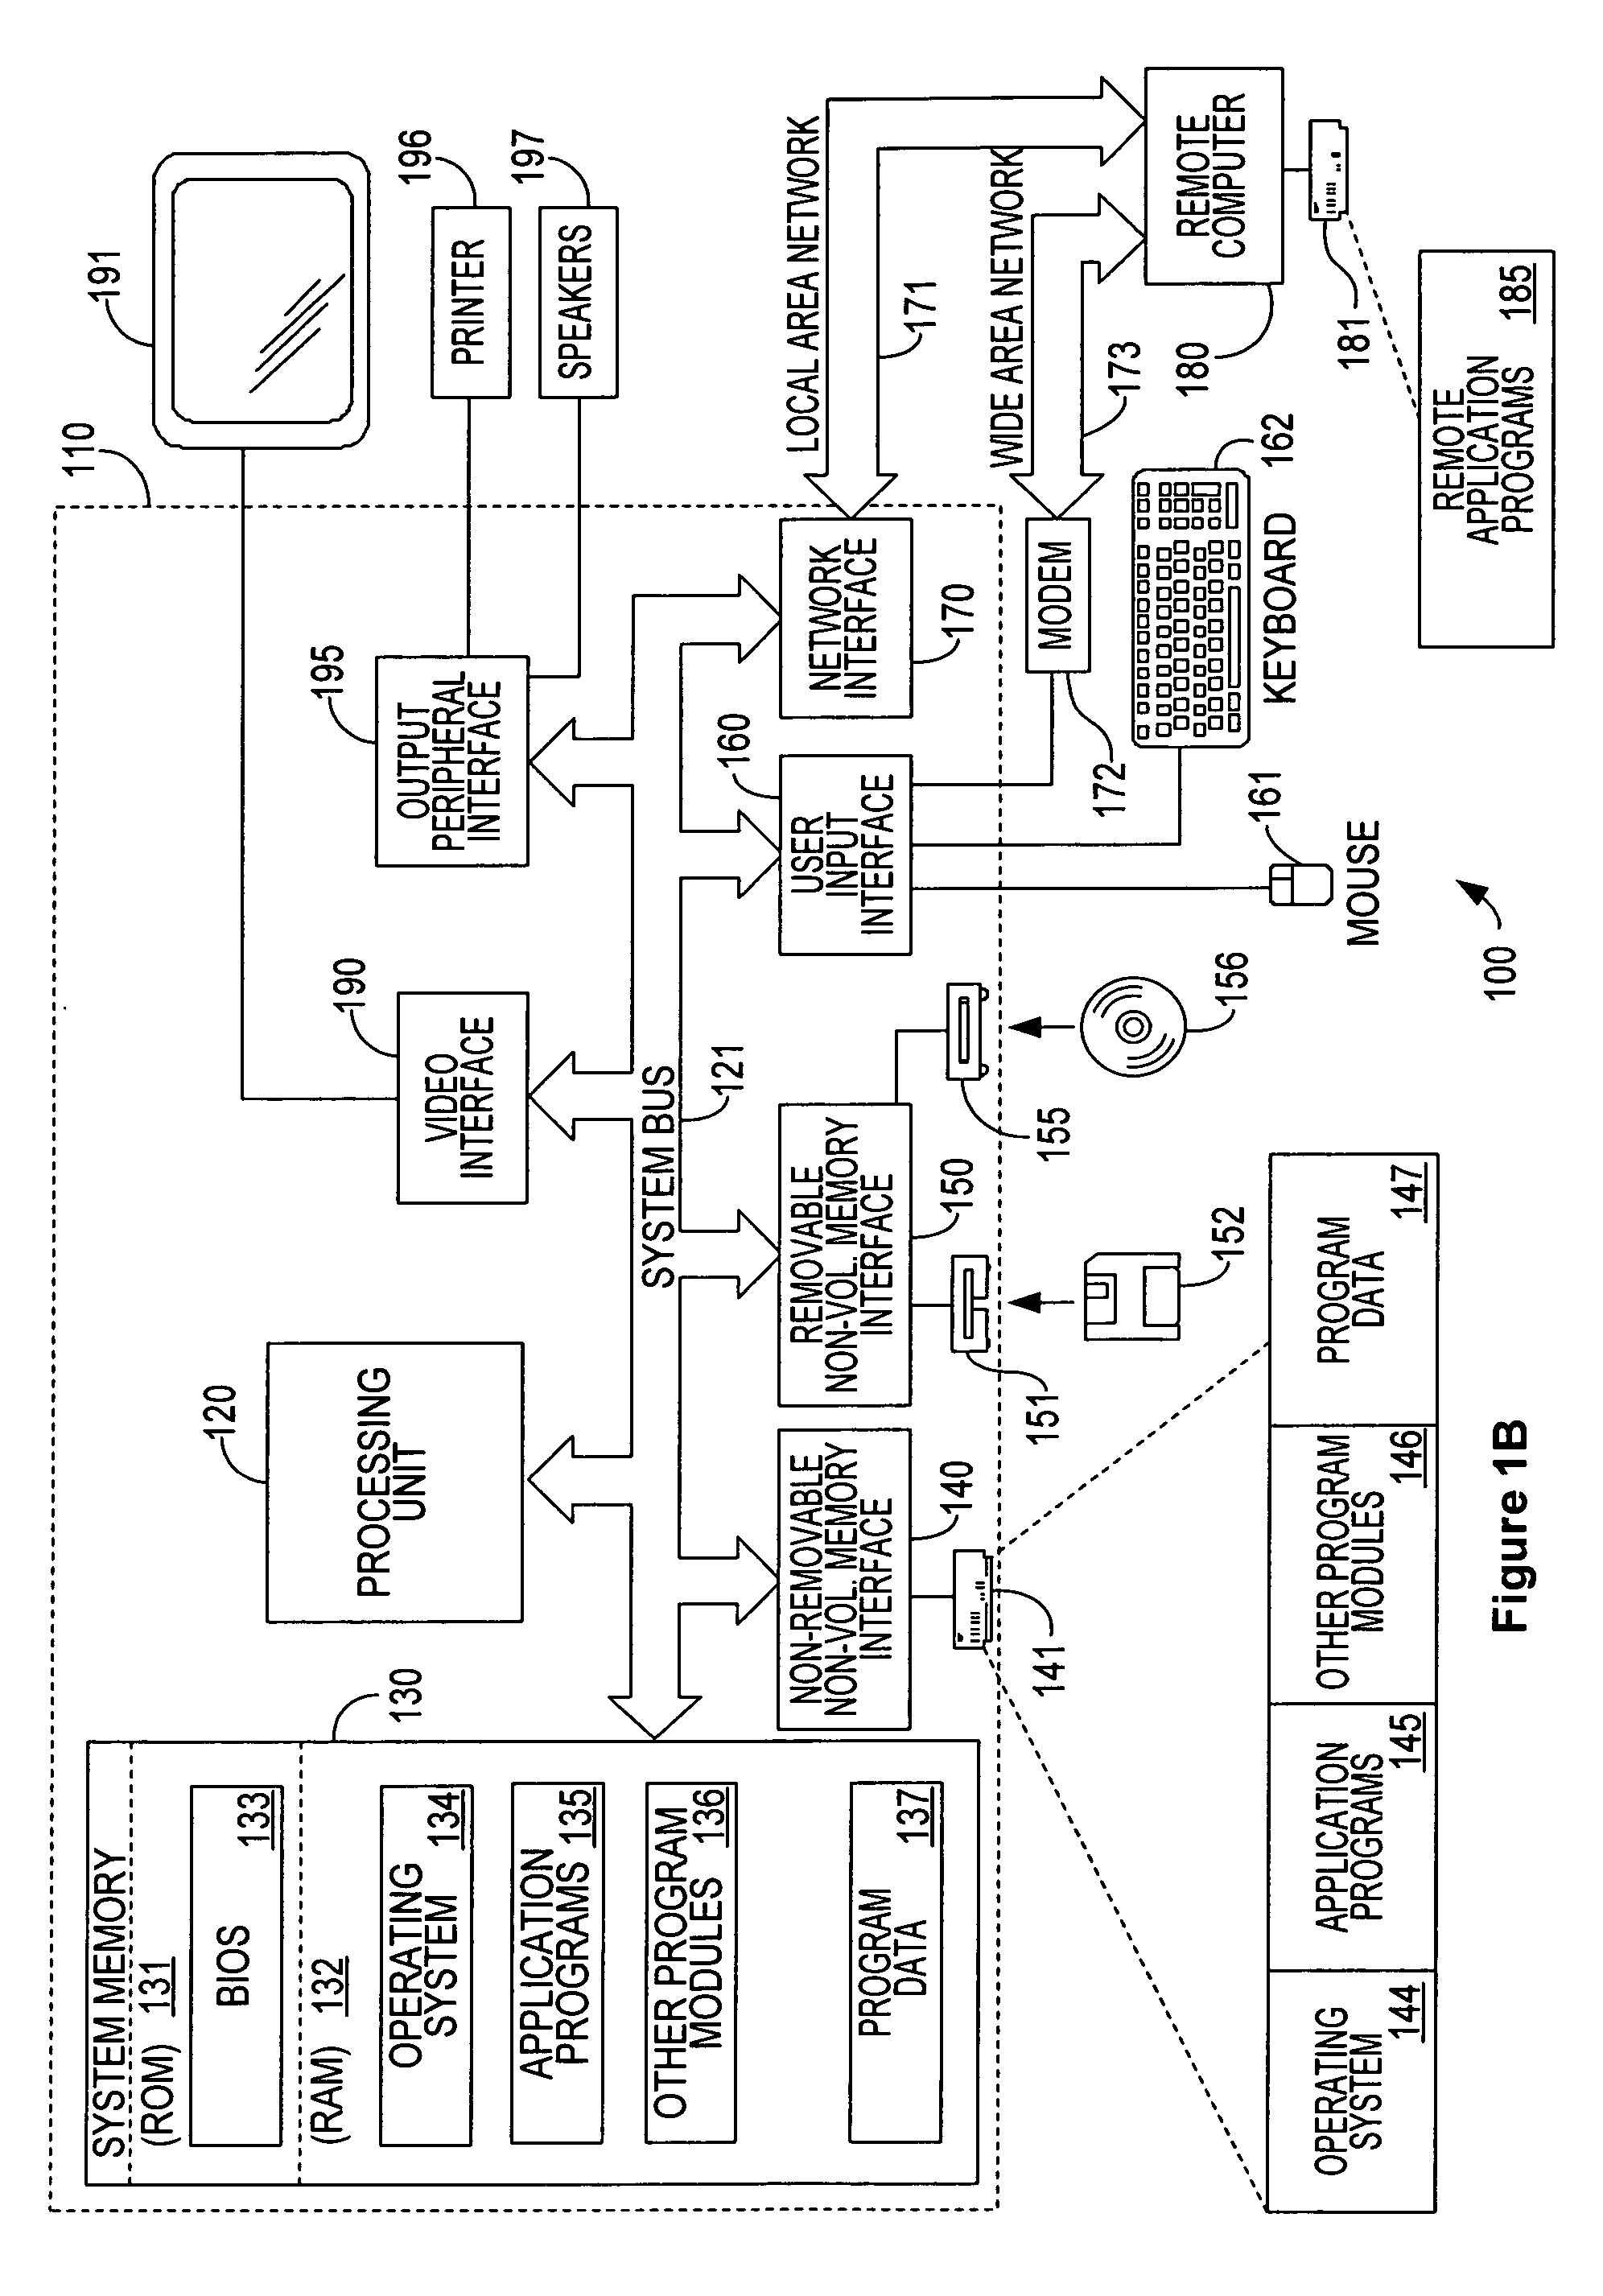 System, method and user interface for network status reporting